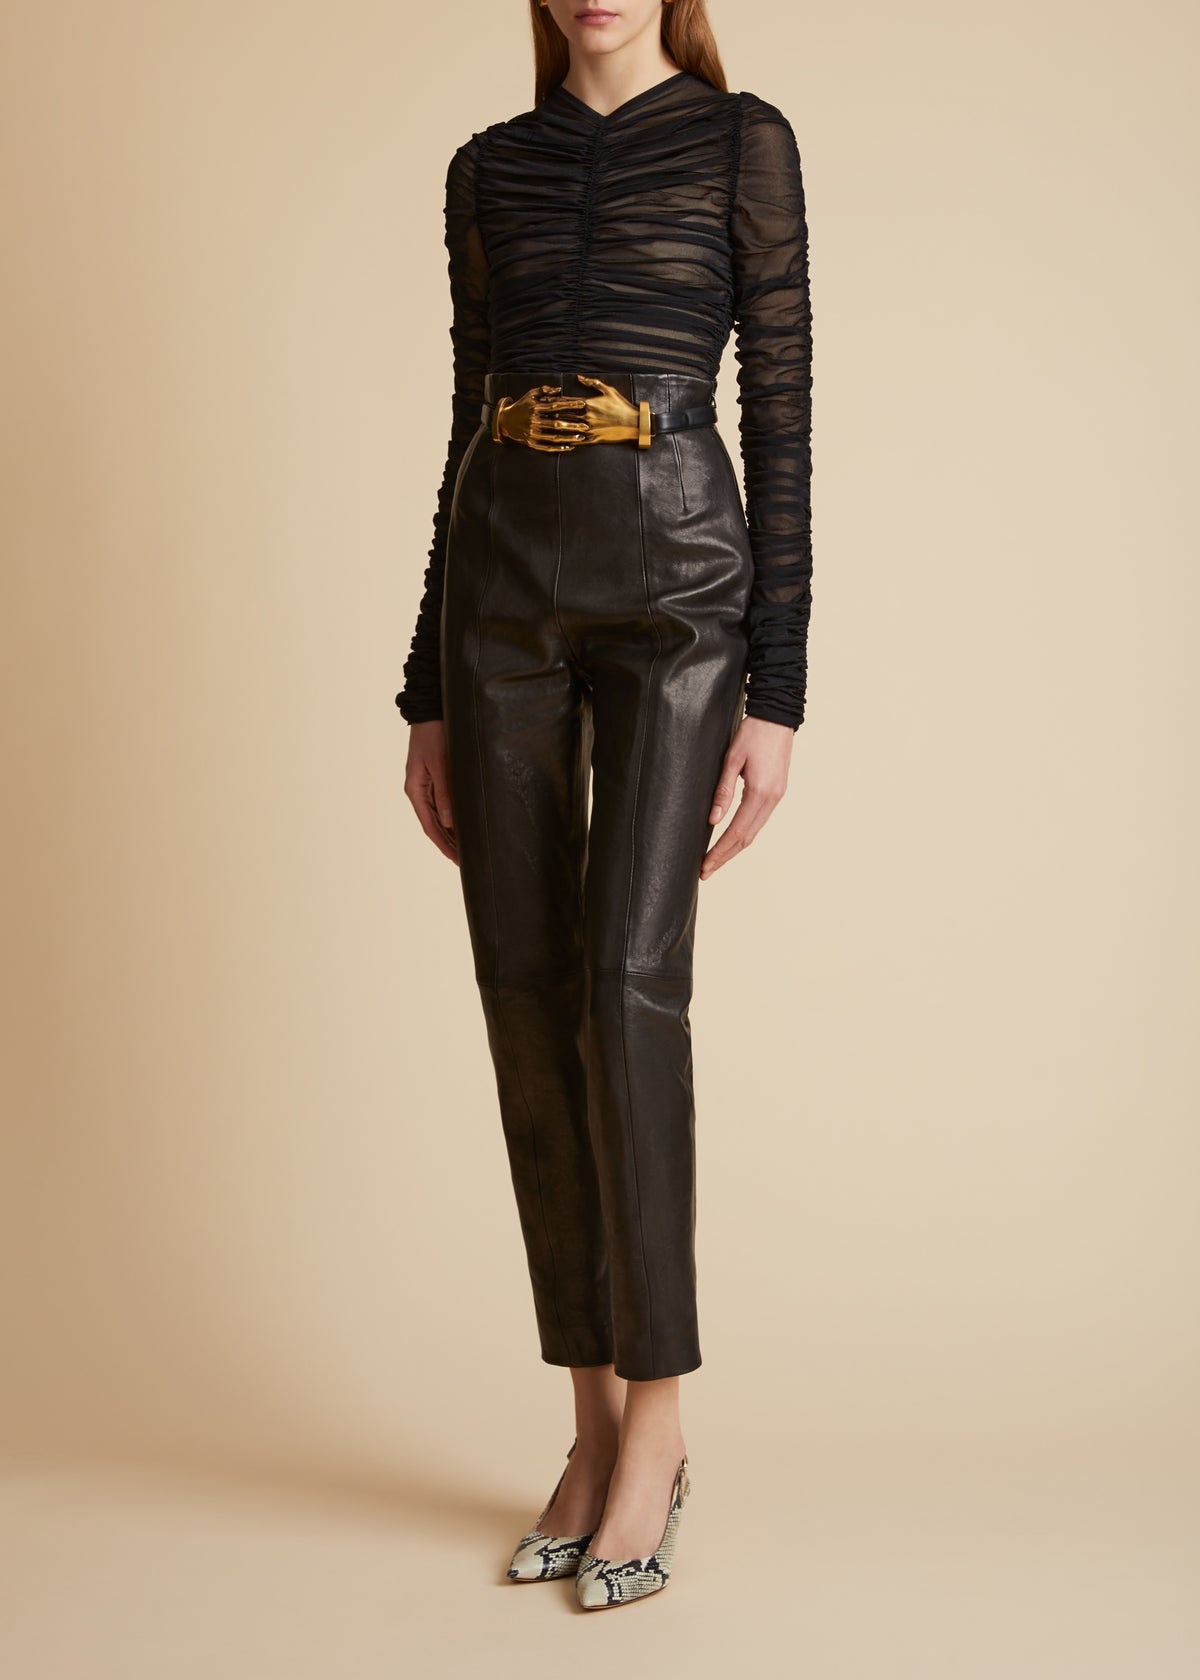 The Sculpted Hands Belt in Black Leather with Antique Gold - 3